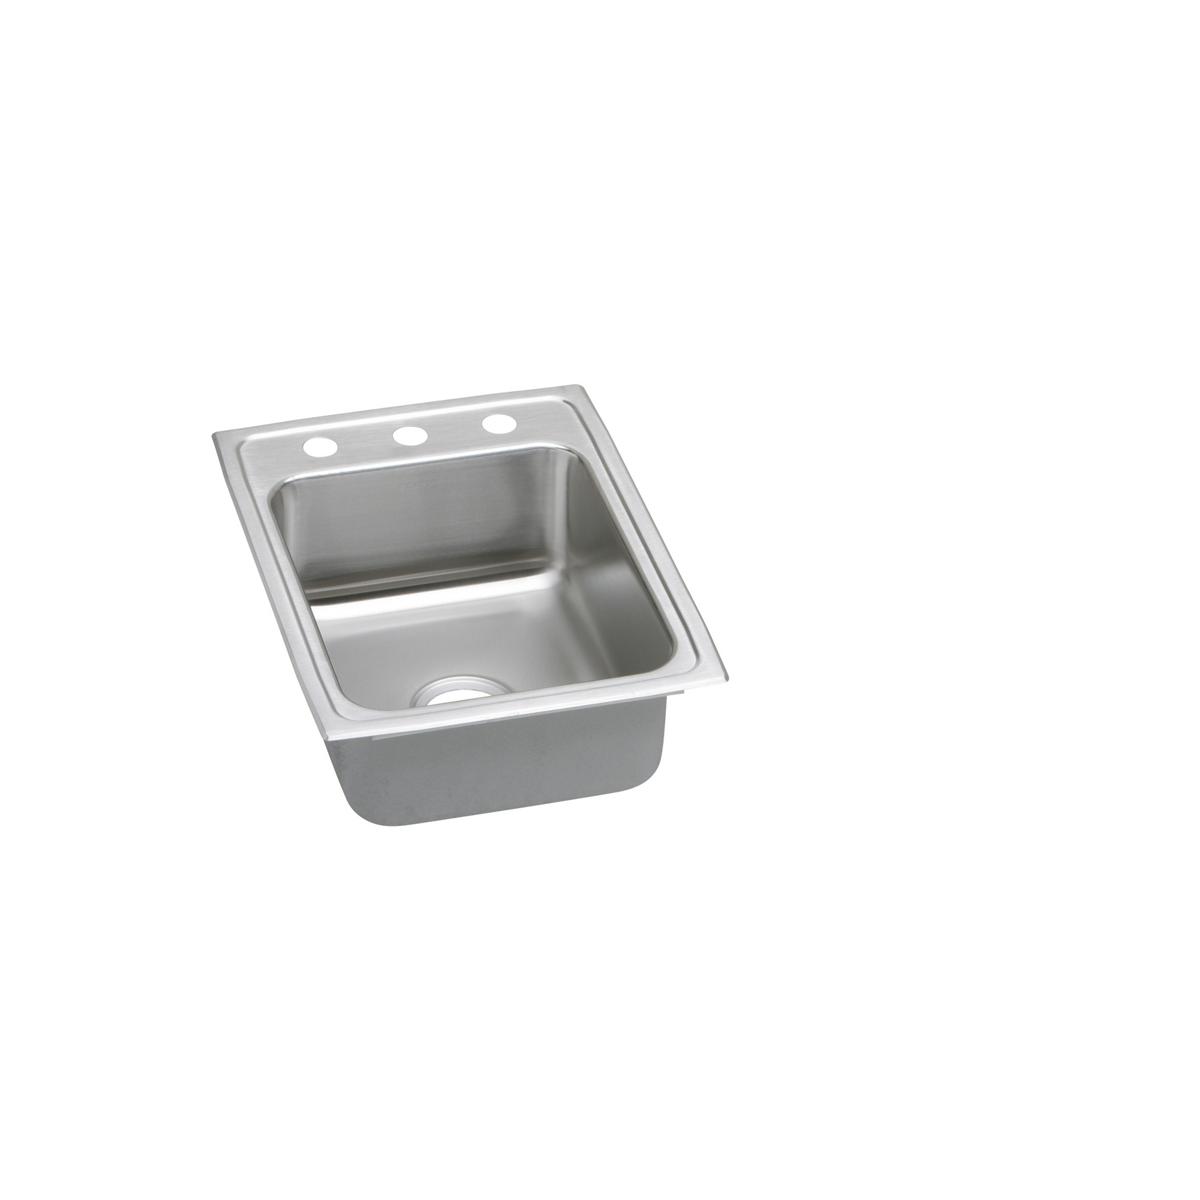 Elkay Lustertone Classic 17" x 22" x 5-1/2" MR2-Hole Single Bowl Drop-in ADA Sink with Quick-clip